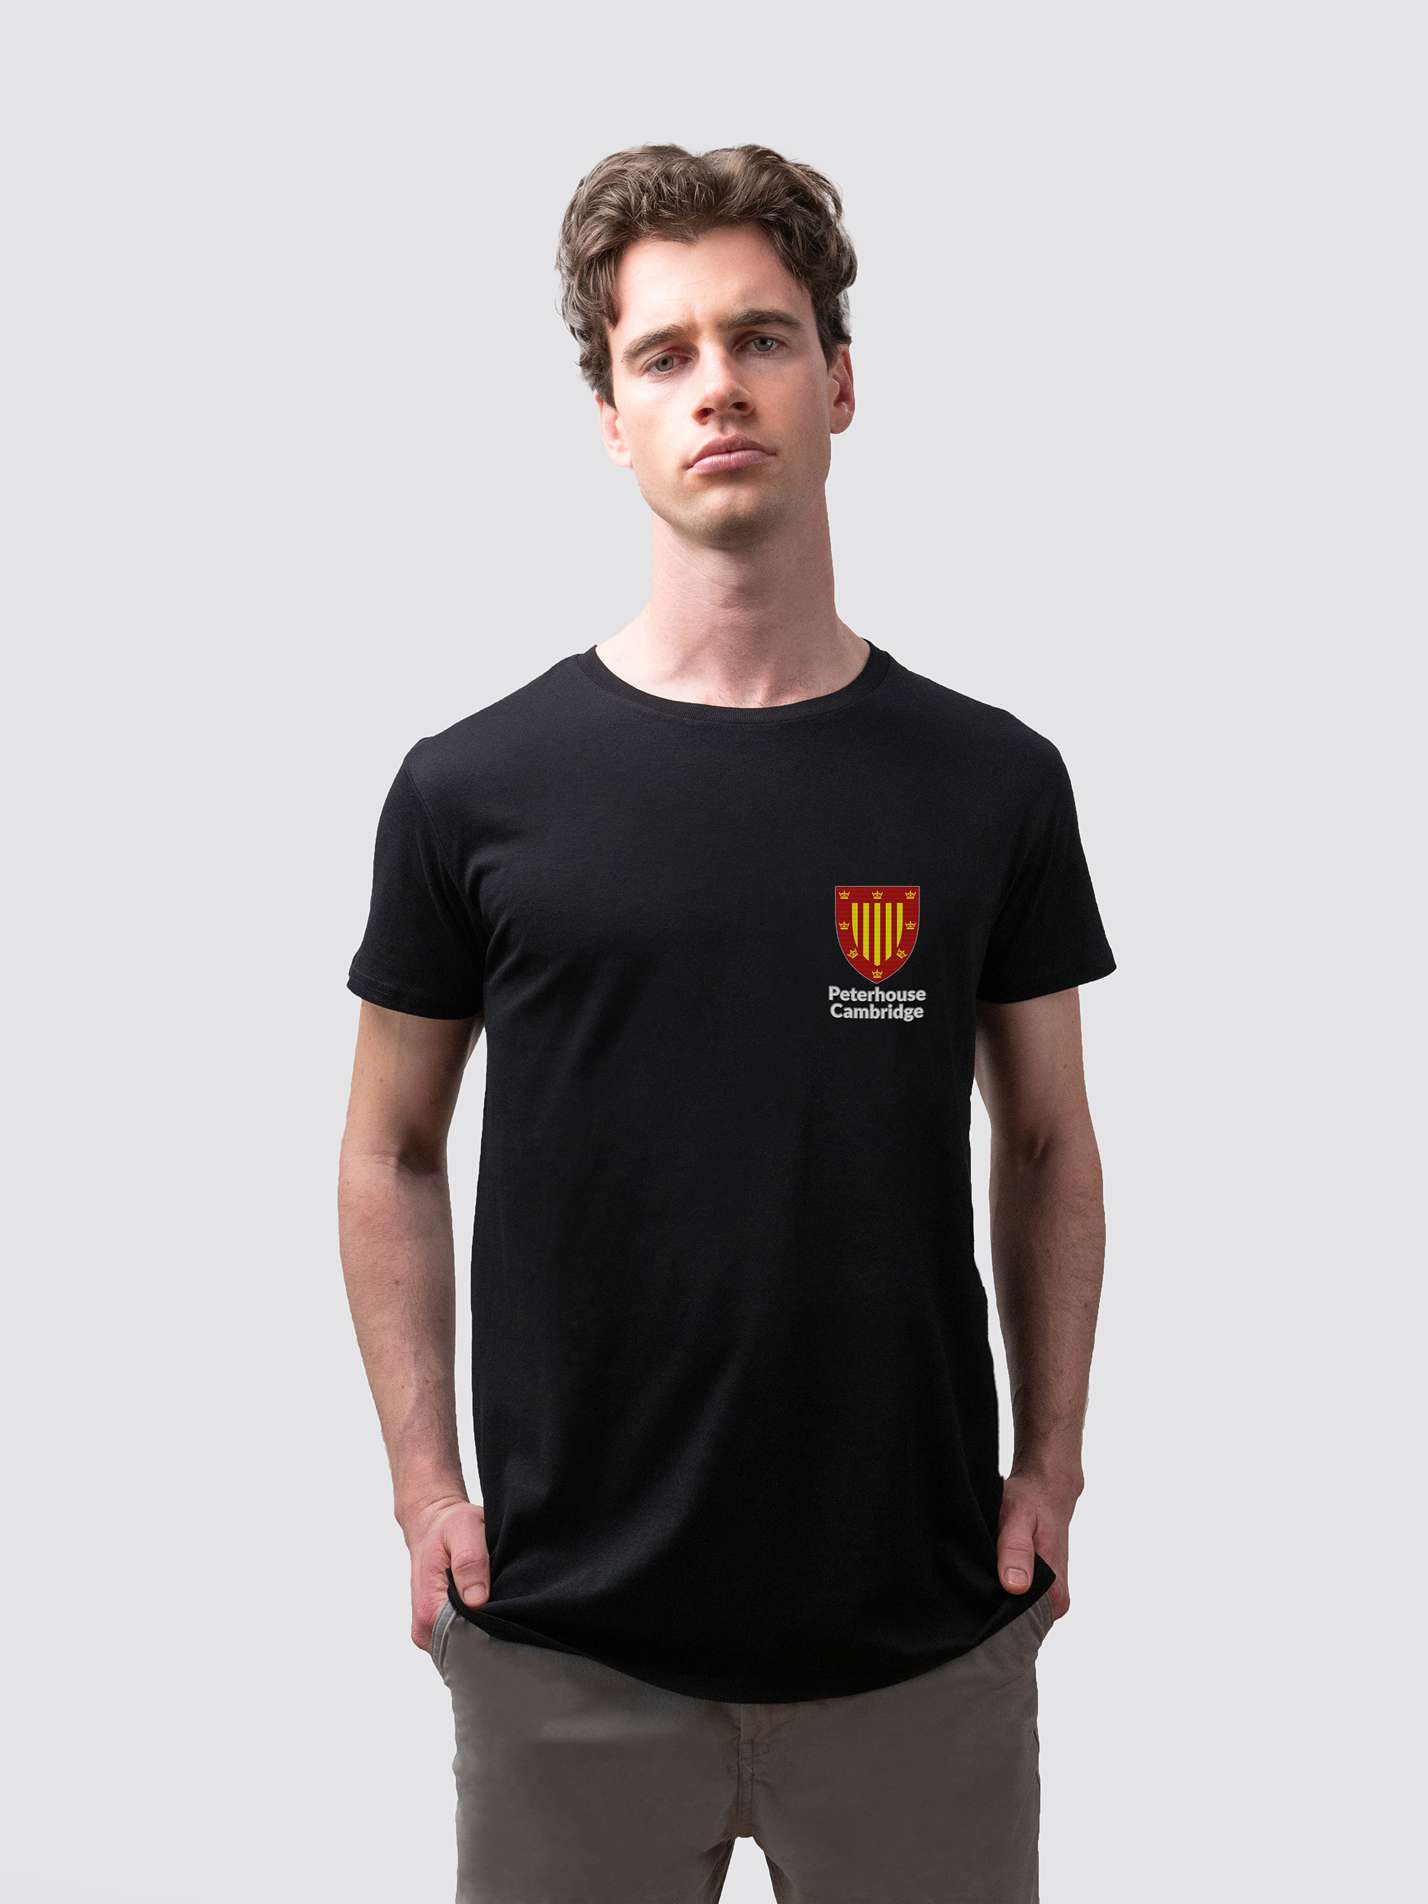 Sustainable Peterhouse t-shirt, made from organic cotton